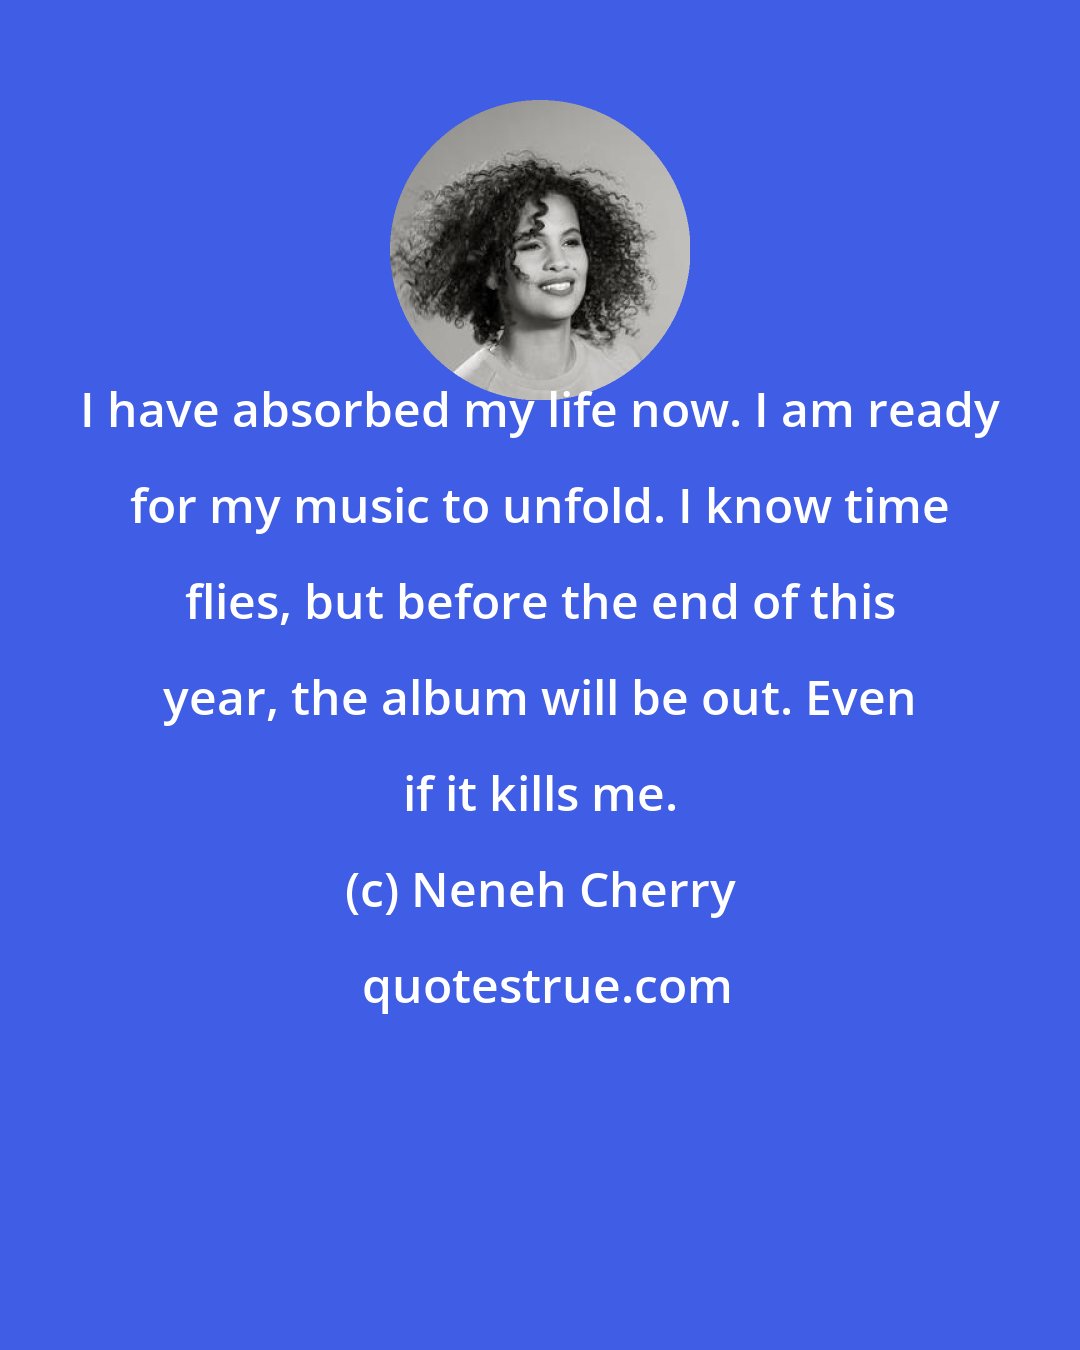 Neneh Cherry: I have absorbed my life now. I am ready for my music to unfold. I know time flies, but before the end of this year, the album will be out. Even if it kills me.